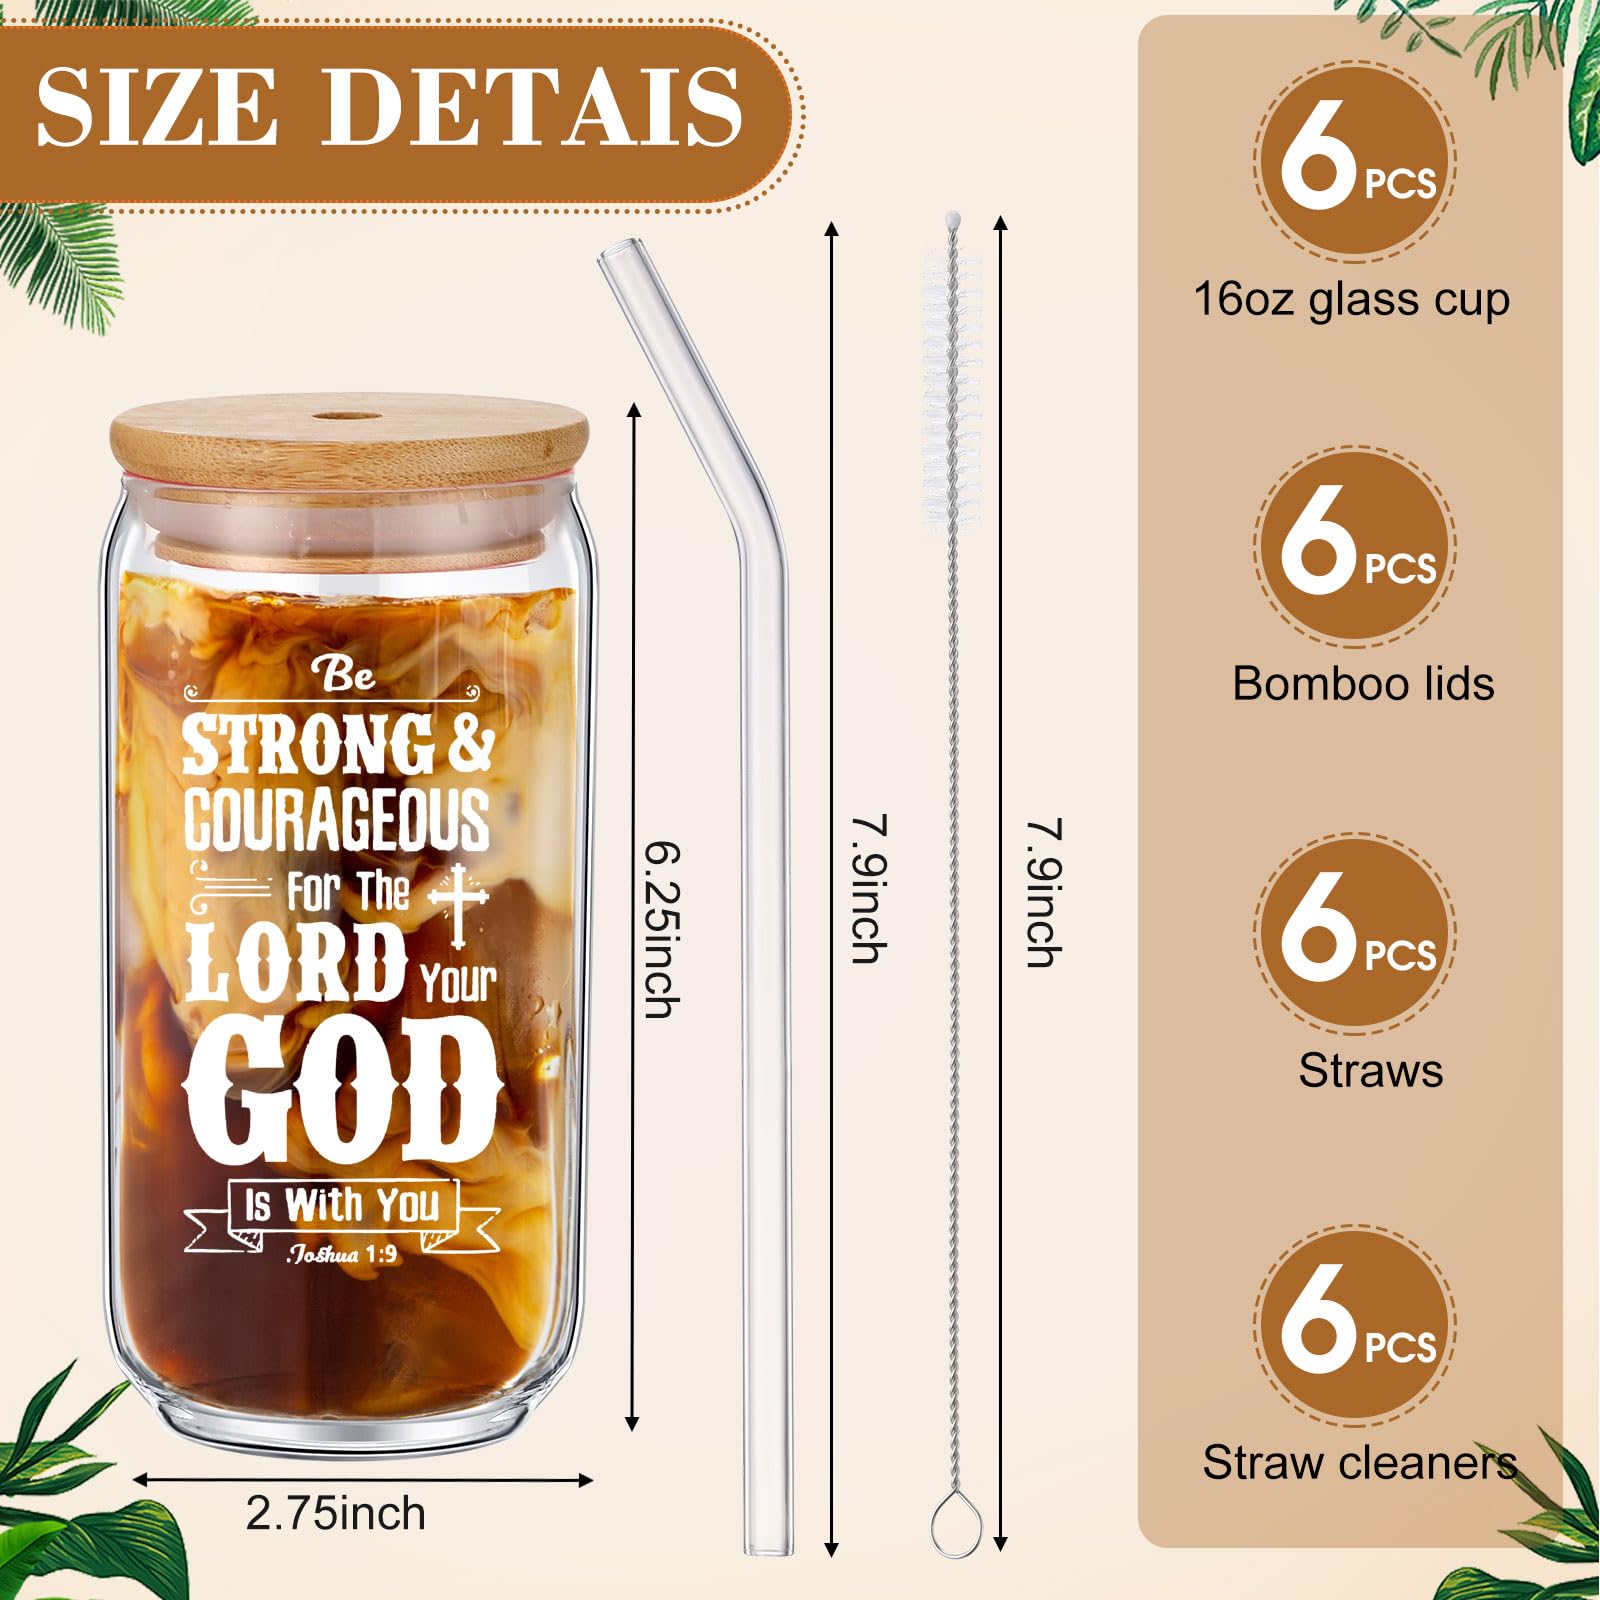 Suttmin 6 Pcs Christian Gifts for Women Religious Gifts Iced Coffee Cups, 16 Oz Drinking Glasses with Bamboo Lids and Straw Set Inspirational Birthday Gifts for Sister, Friend, Mom, Coworker